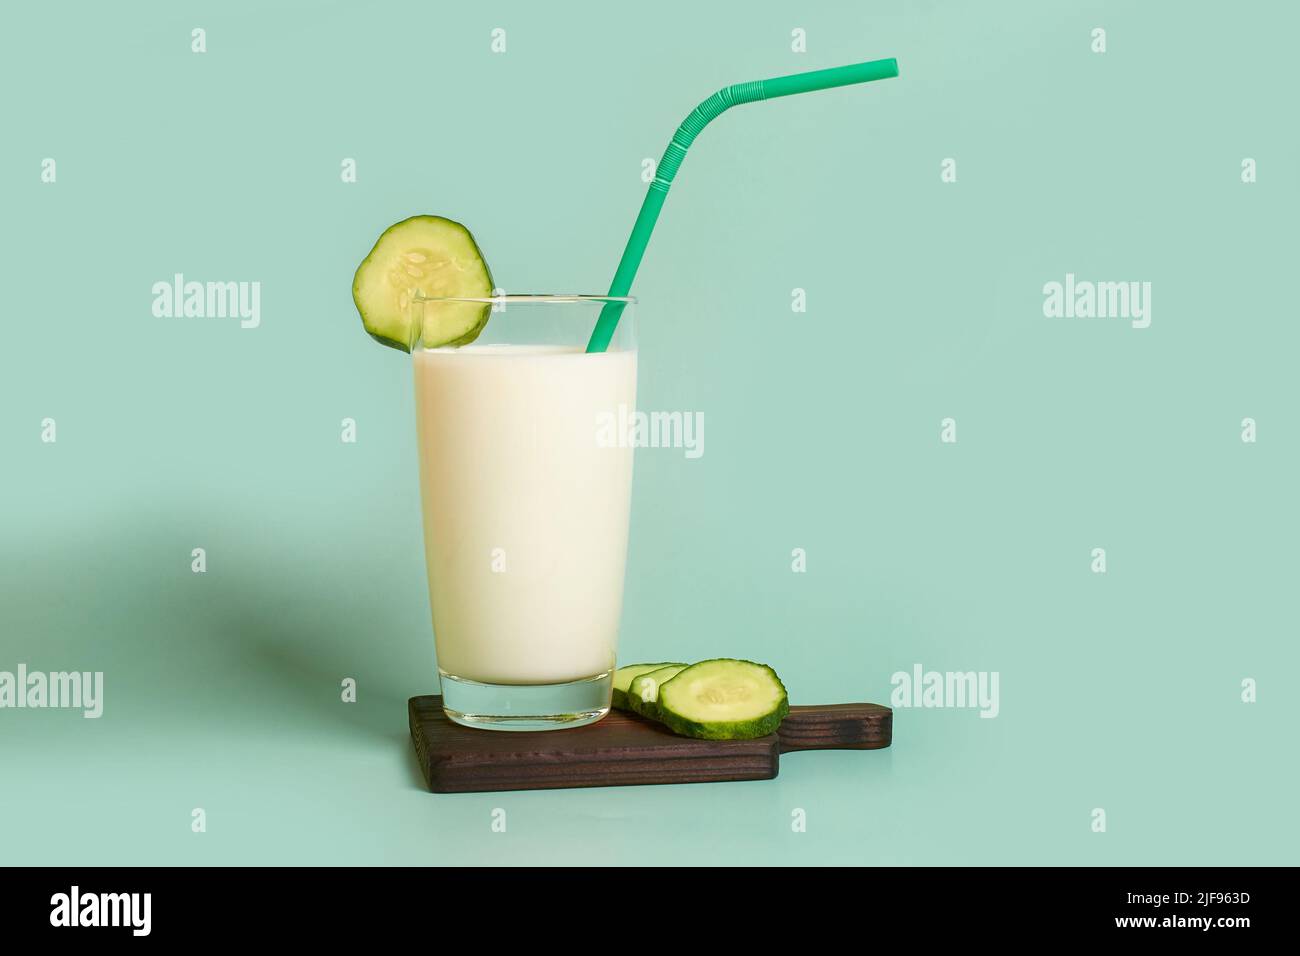 Glass with milk, plastic tube and cucumber slices on a wooden stand  Stock Photo